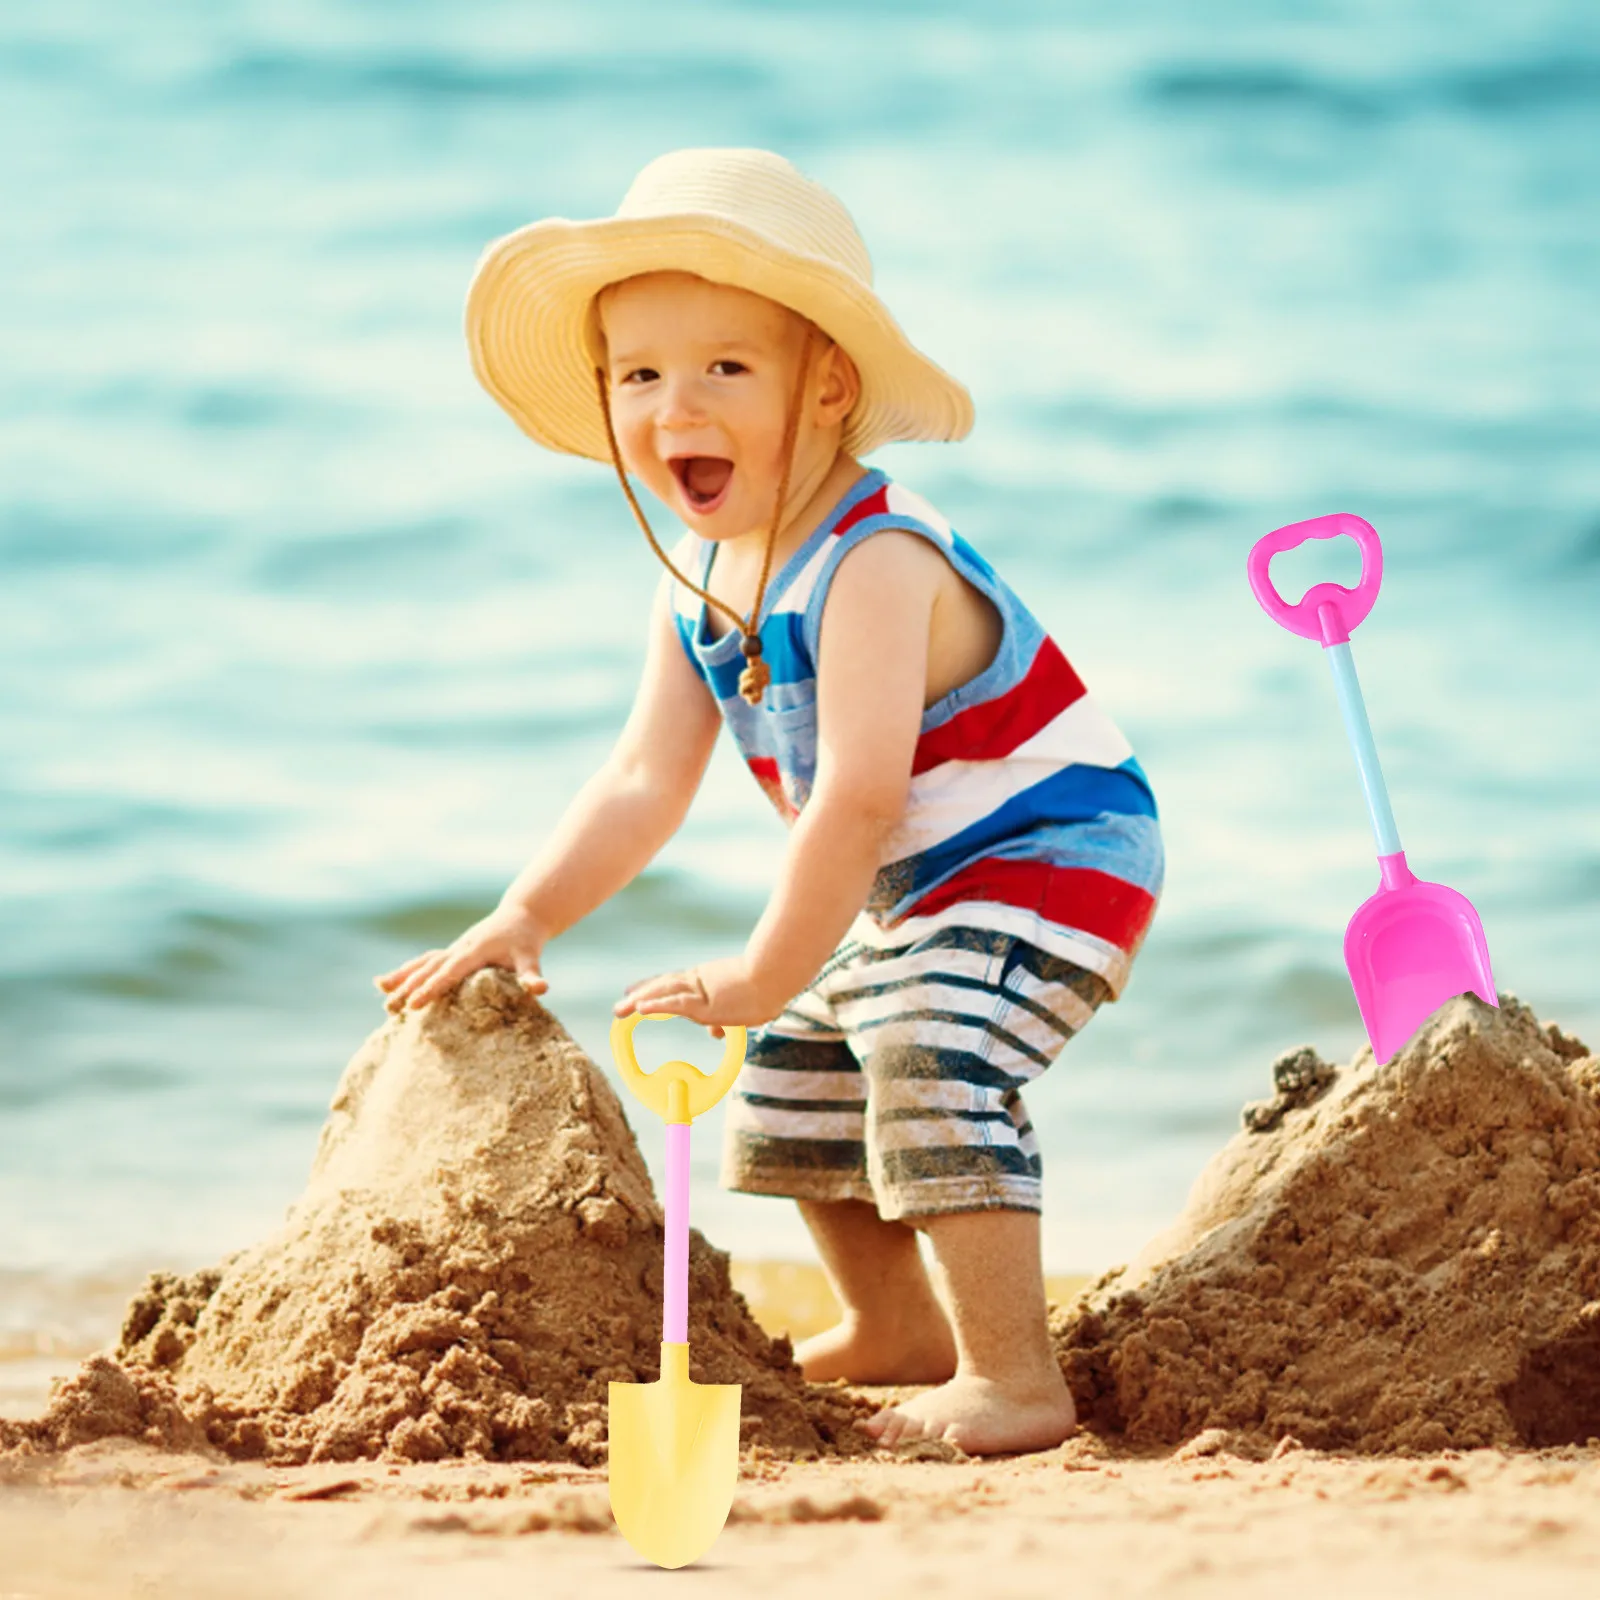 Shovel Toys for Toddlers with Handle,Durable ABS Plastic Spade for Toy Shovel for Kids Playing On The Beach in Summer Sand Shovels for Kids Beach Shovels Plastic Beach Shovel Tool Kit 